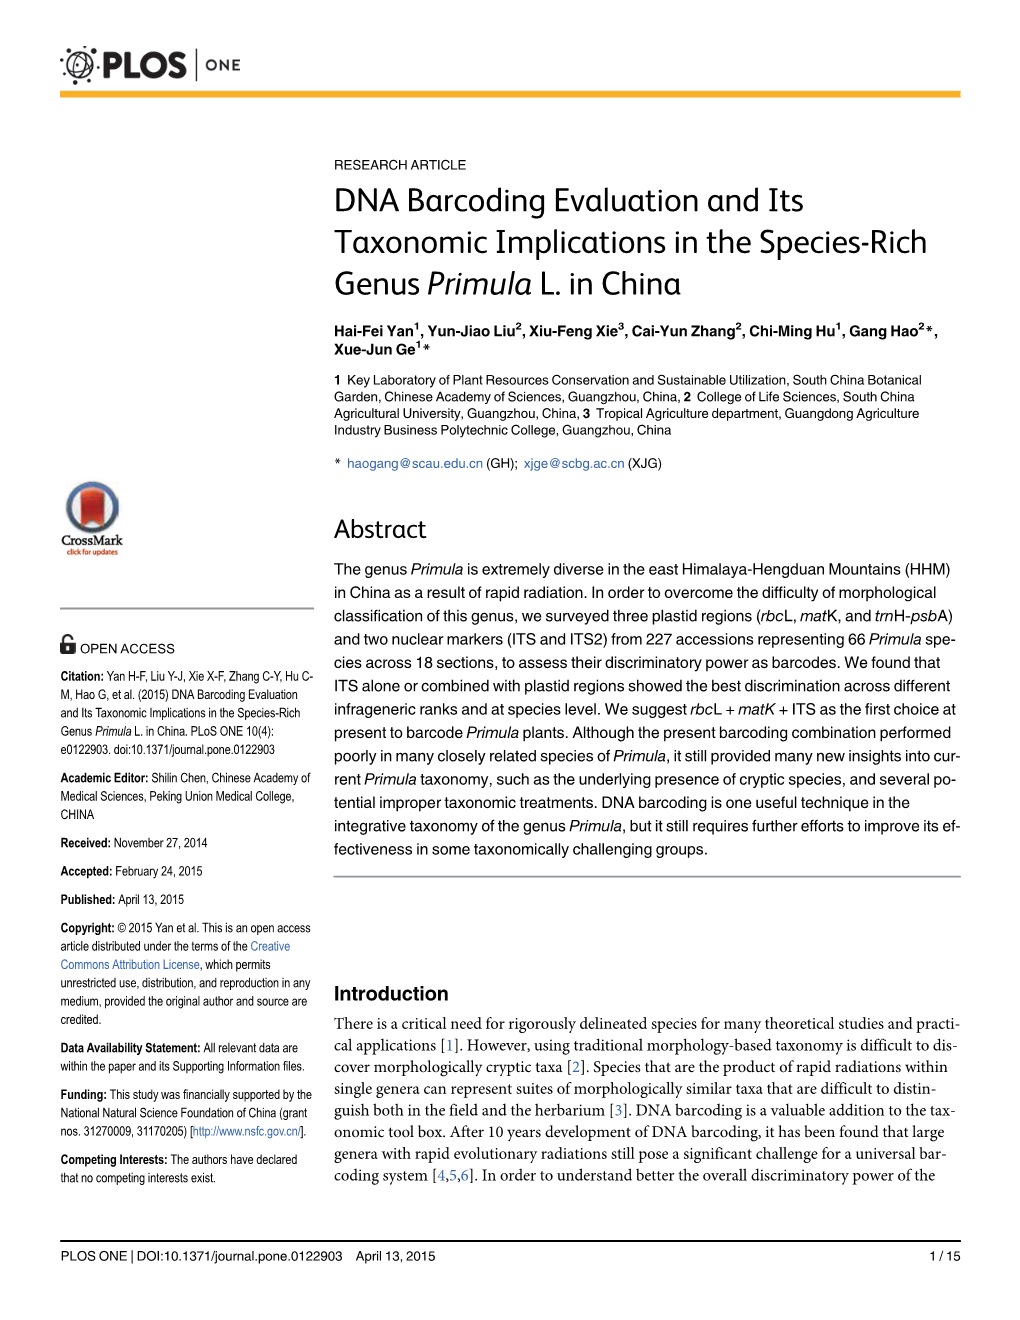 DNA Barcoding Evaluation and Its Taxonomic Implications in the Species-Rich Genus Primula L. in China